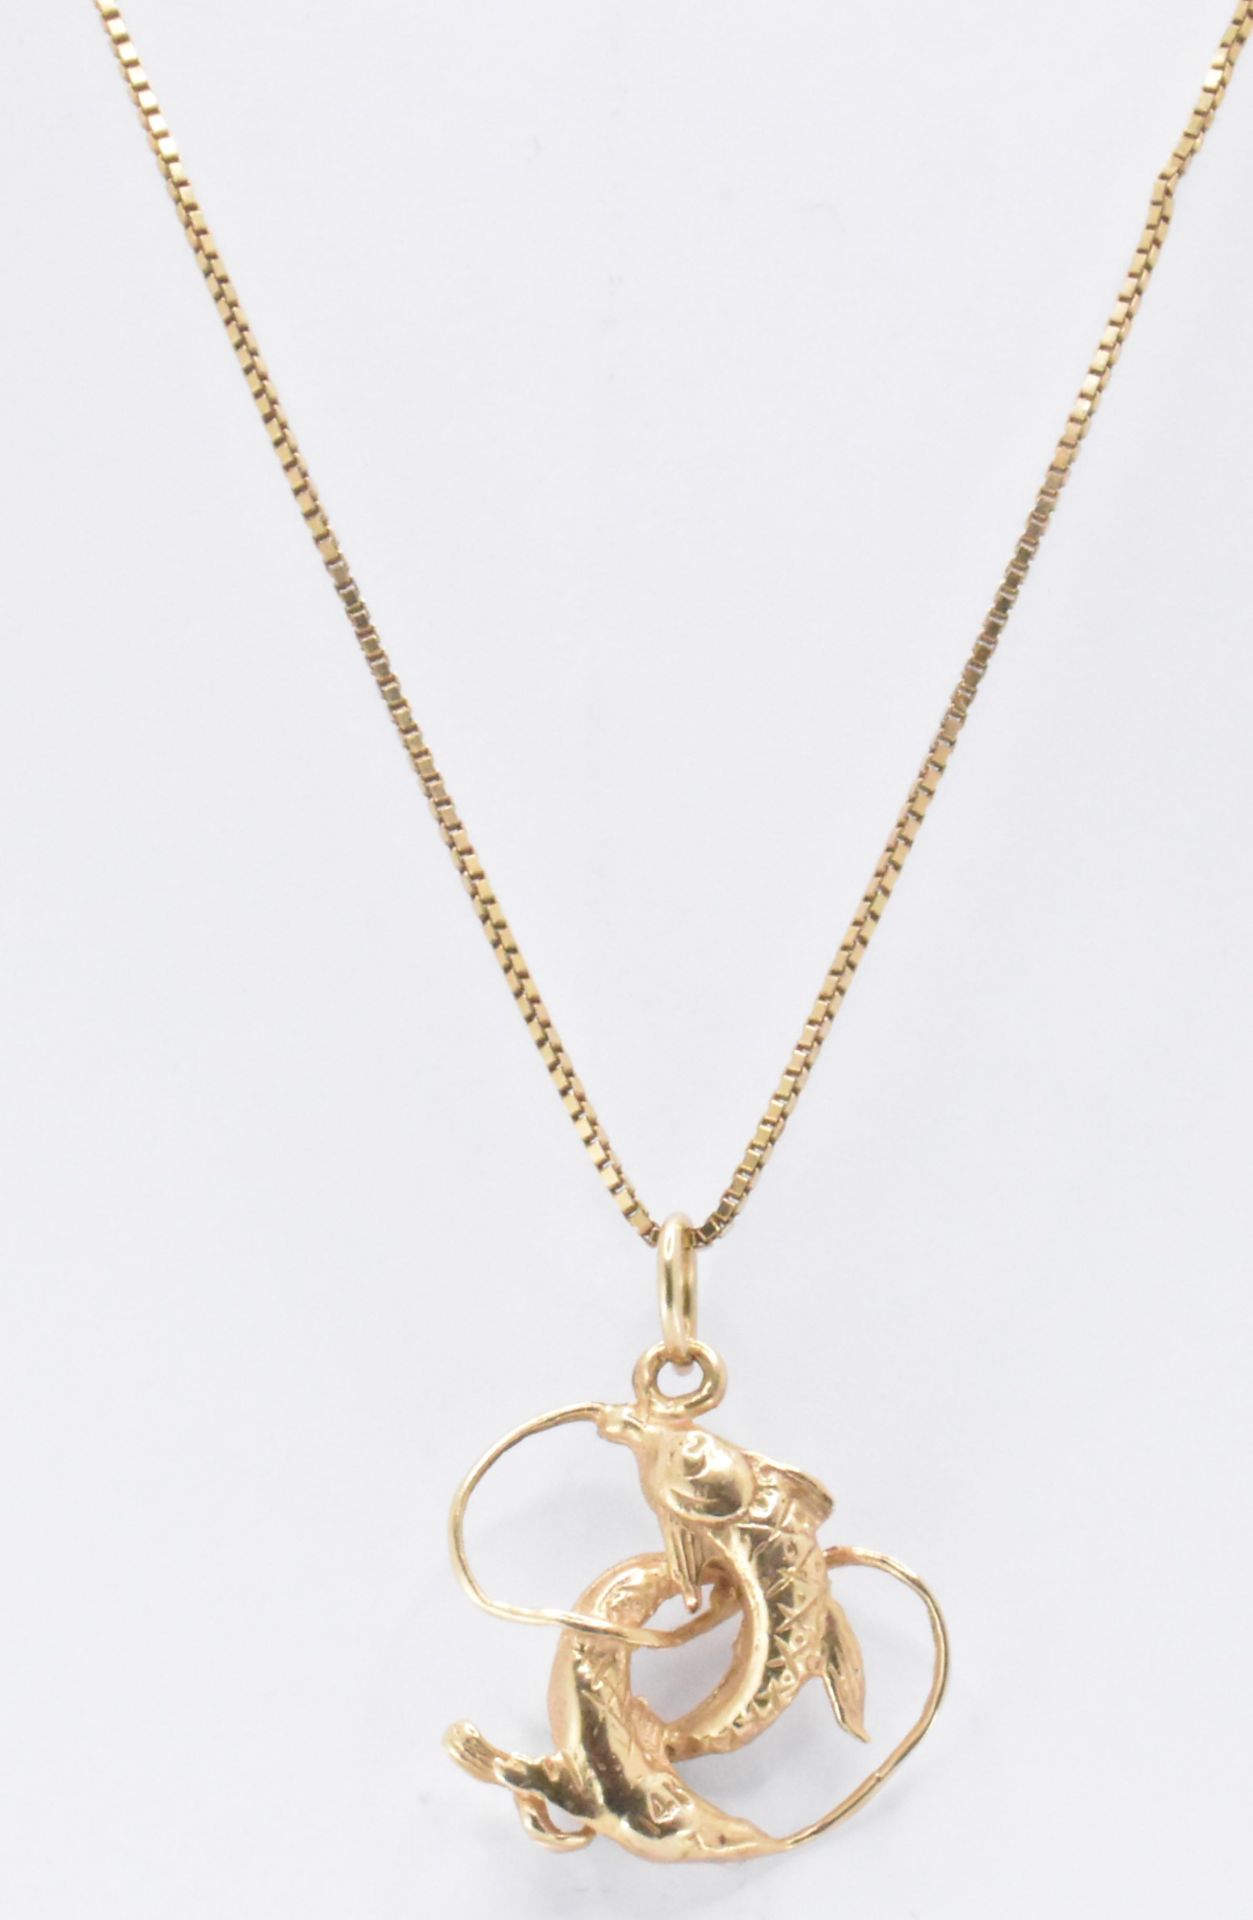 14CT GOLD CHAIN NECKLACE WITH 9CT FISH PENDANT